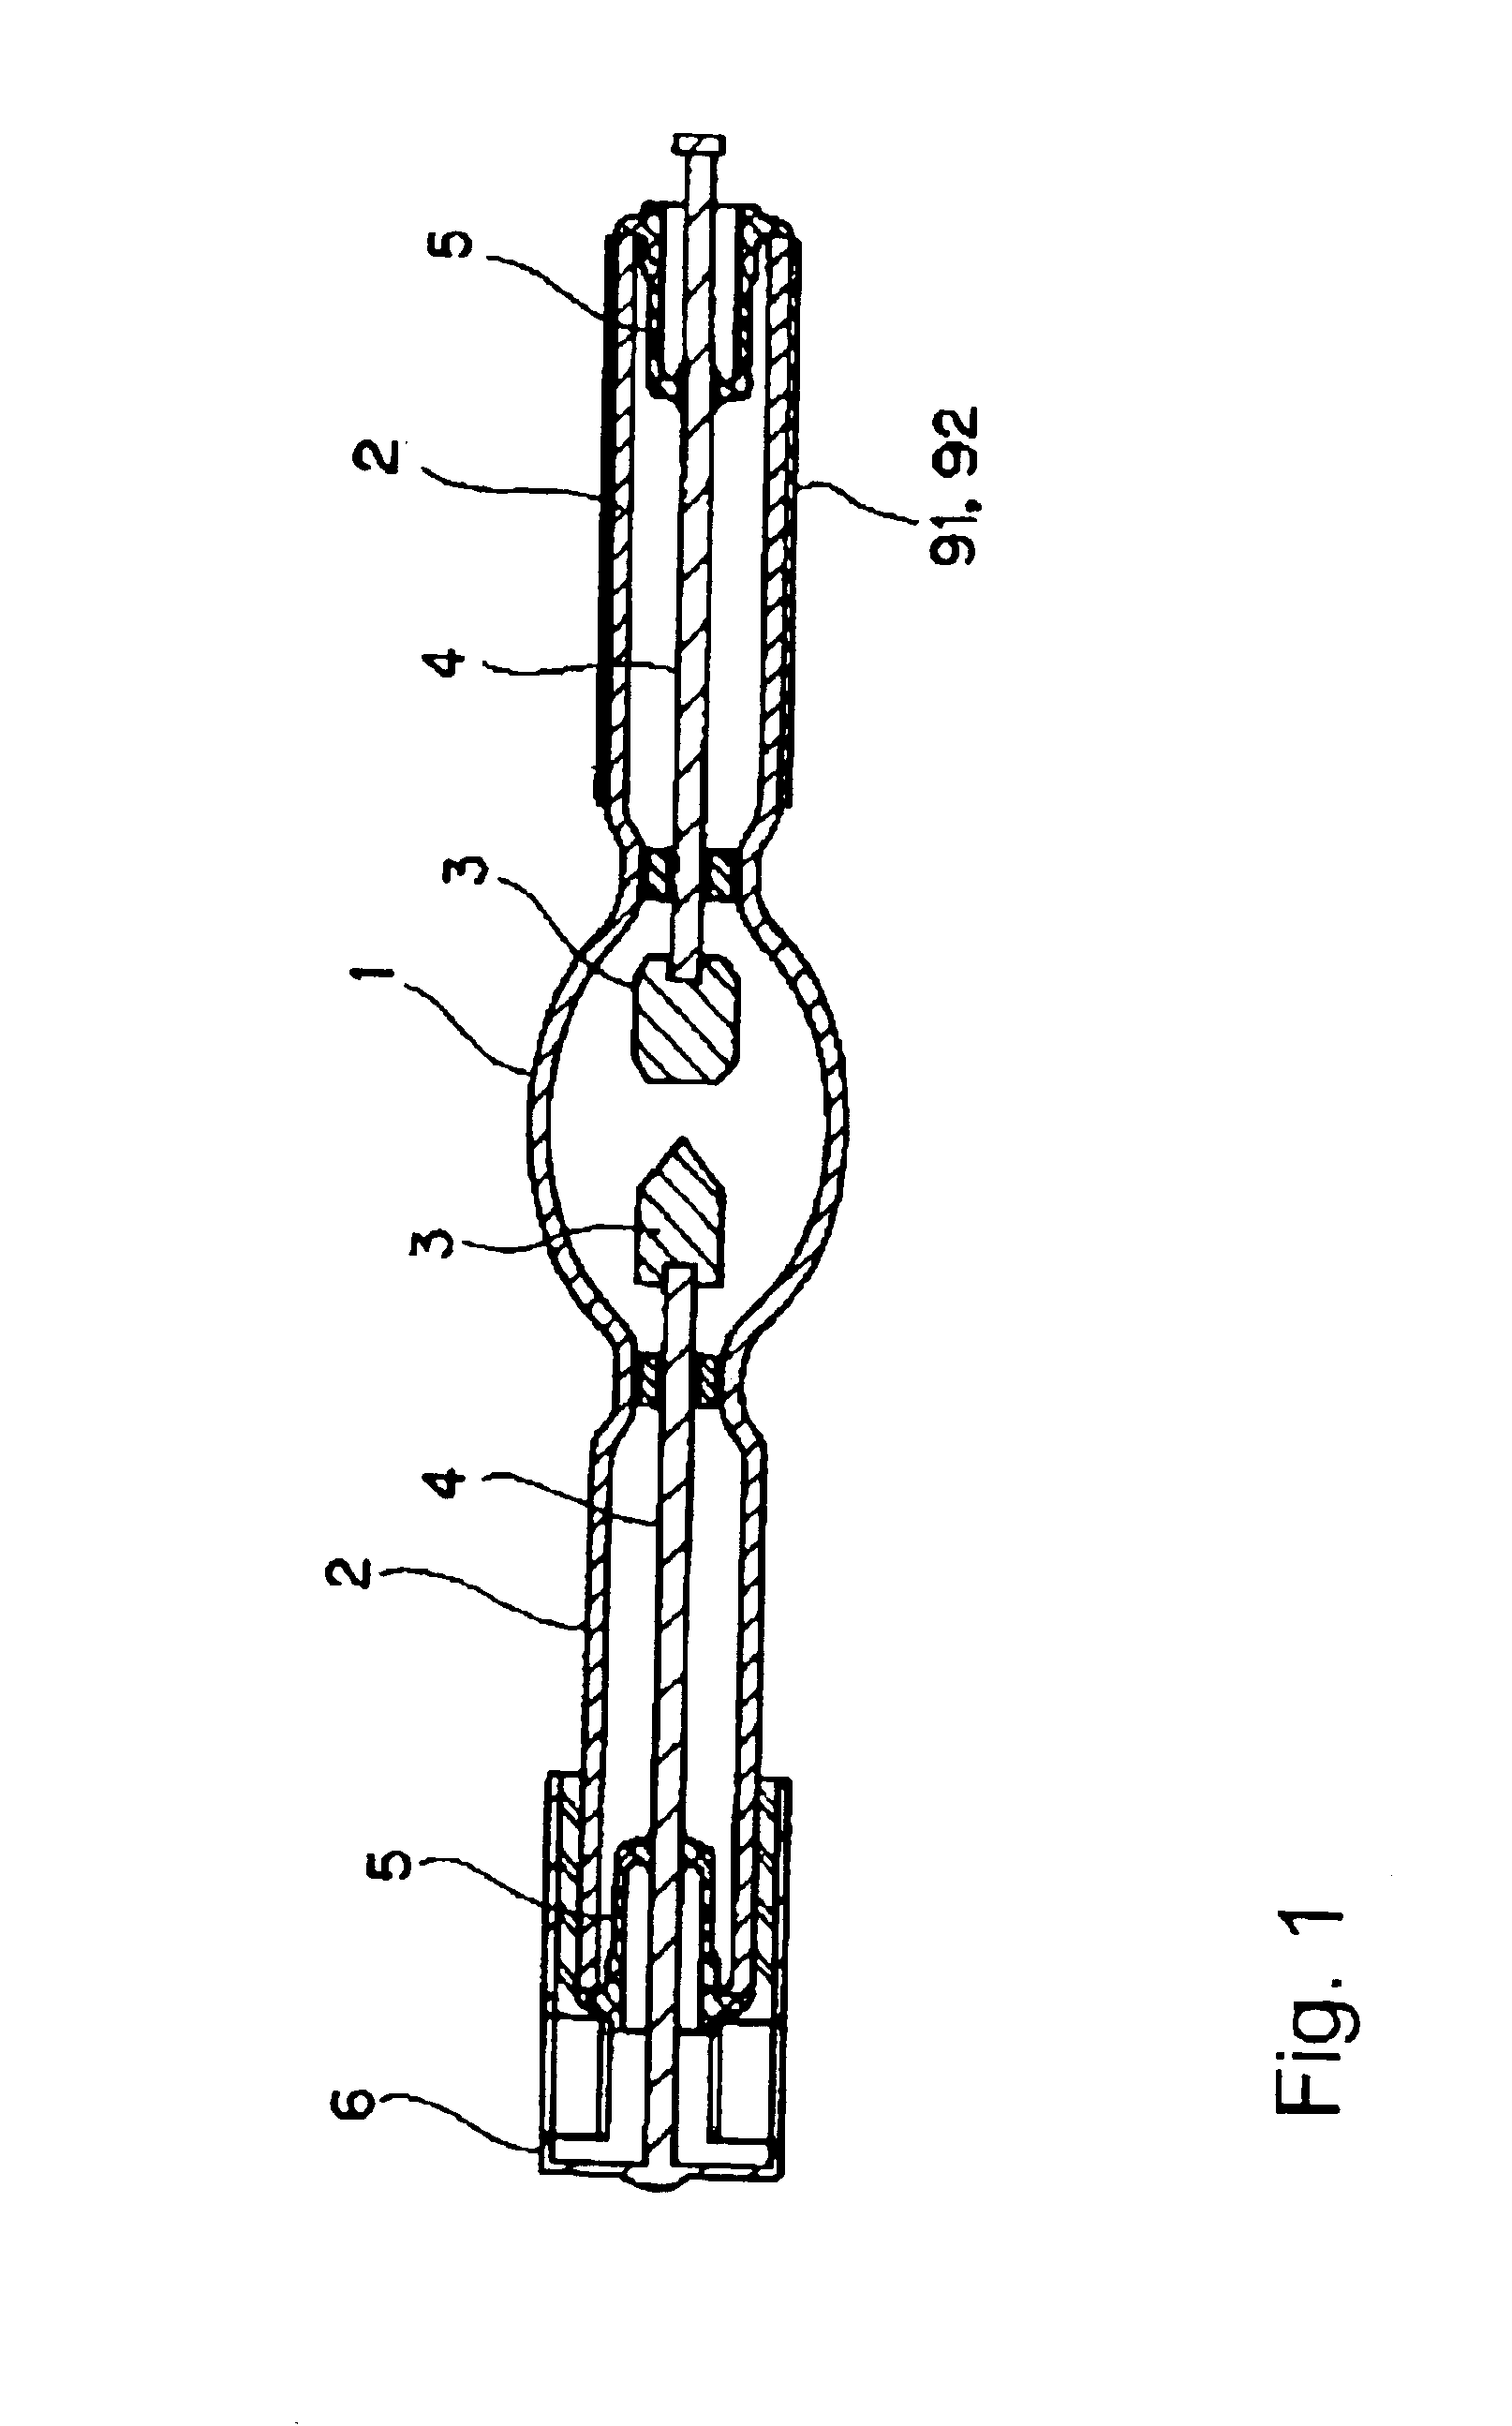 Discharge lamp of the short arc type